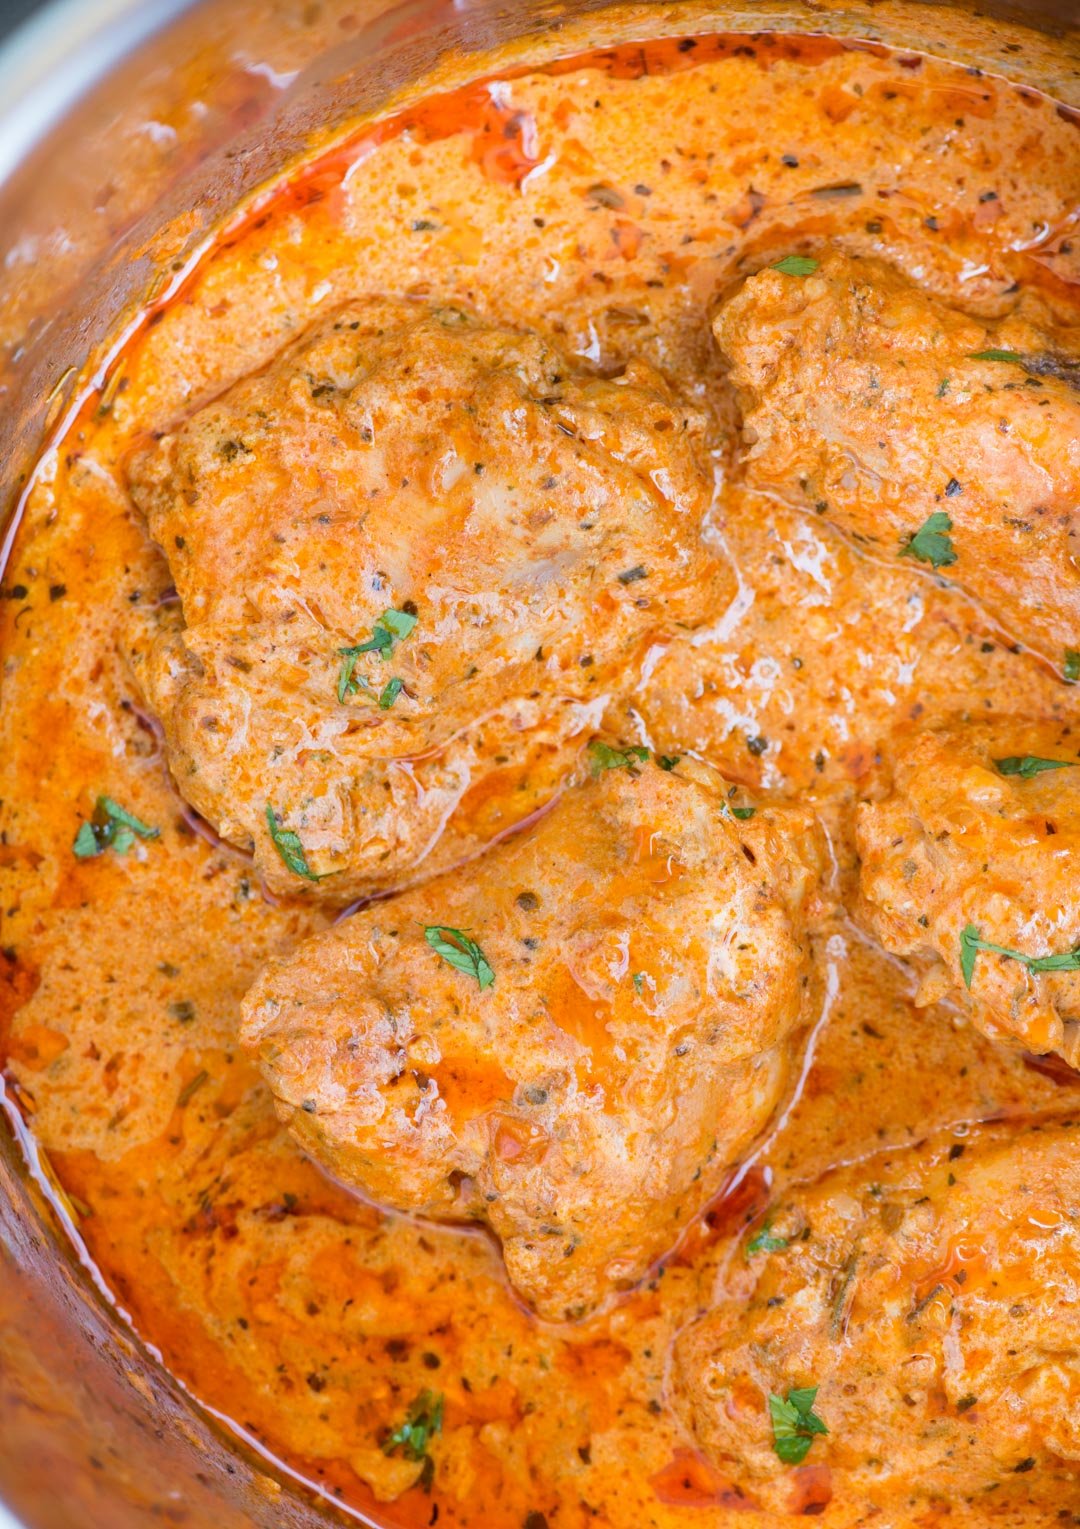 Instant Pot Chicken in a creamy tomato sauce with juicy chicken thighs, buttery tomato sauce is incredibly delicious and takes less than 30 minutes to make.